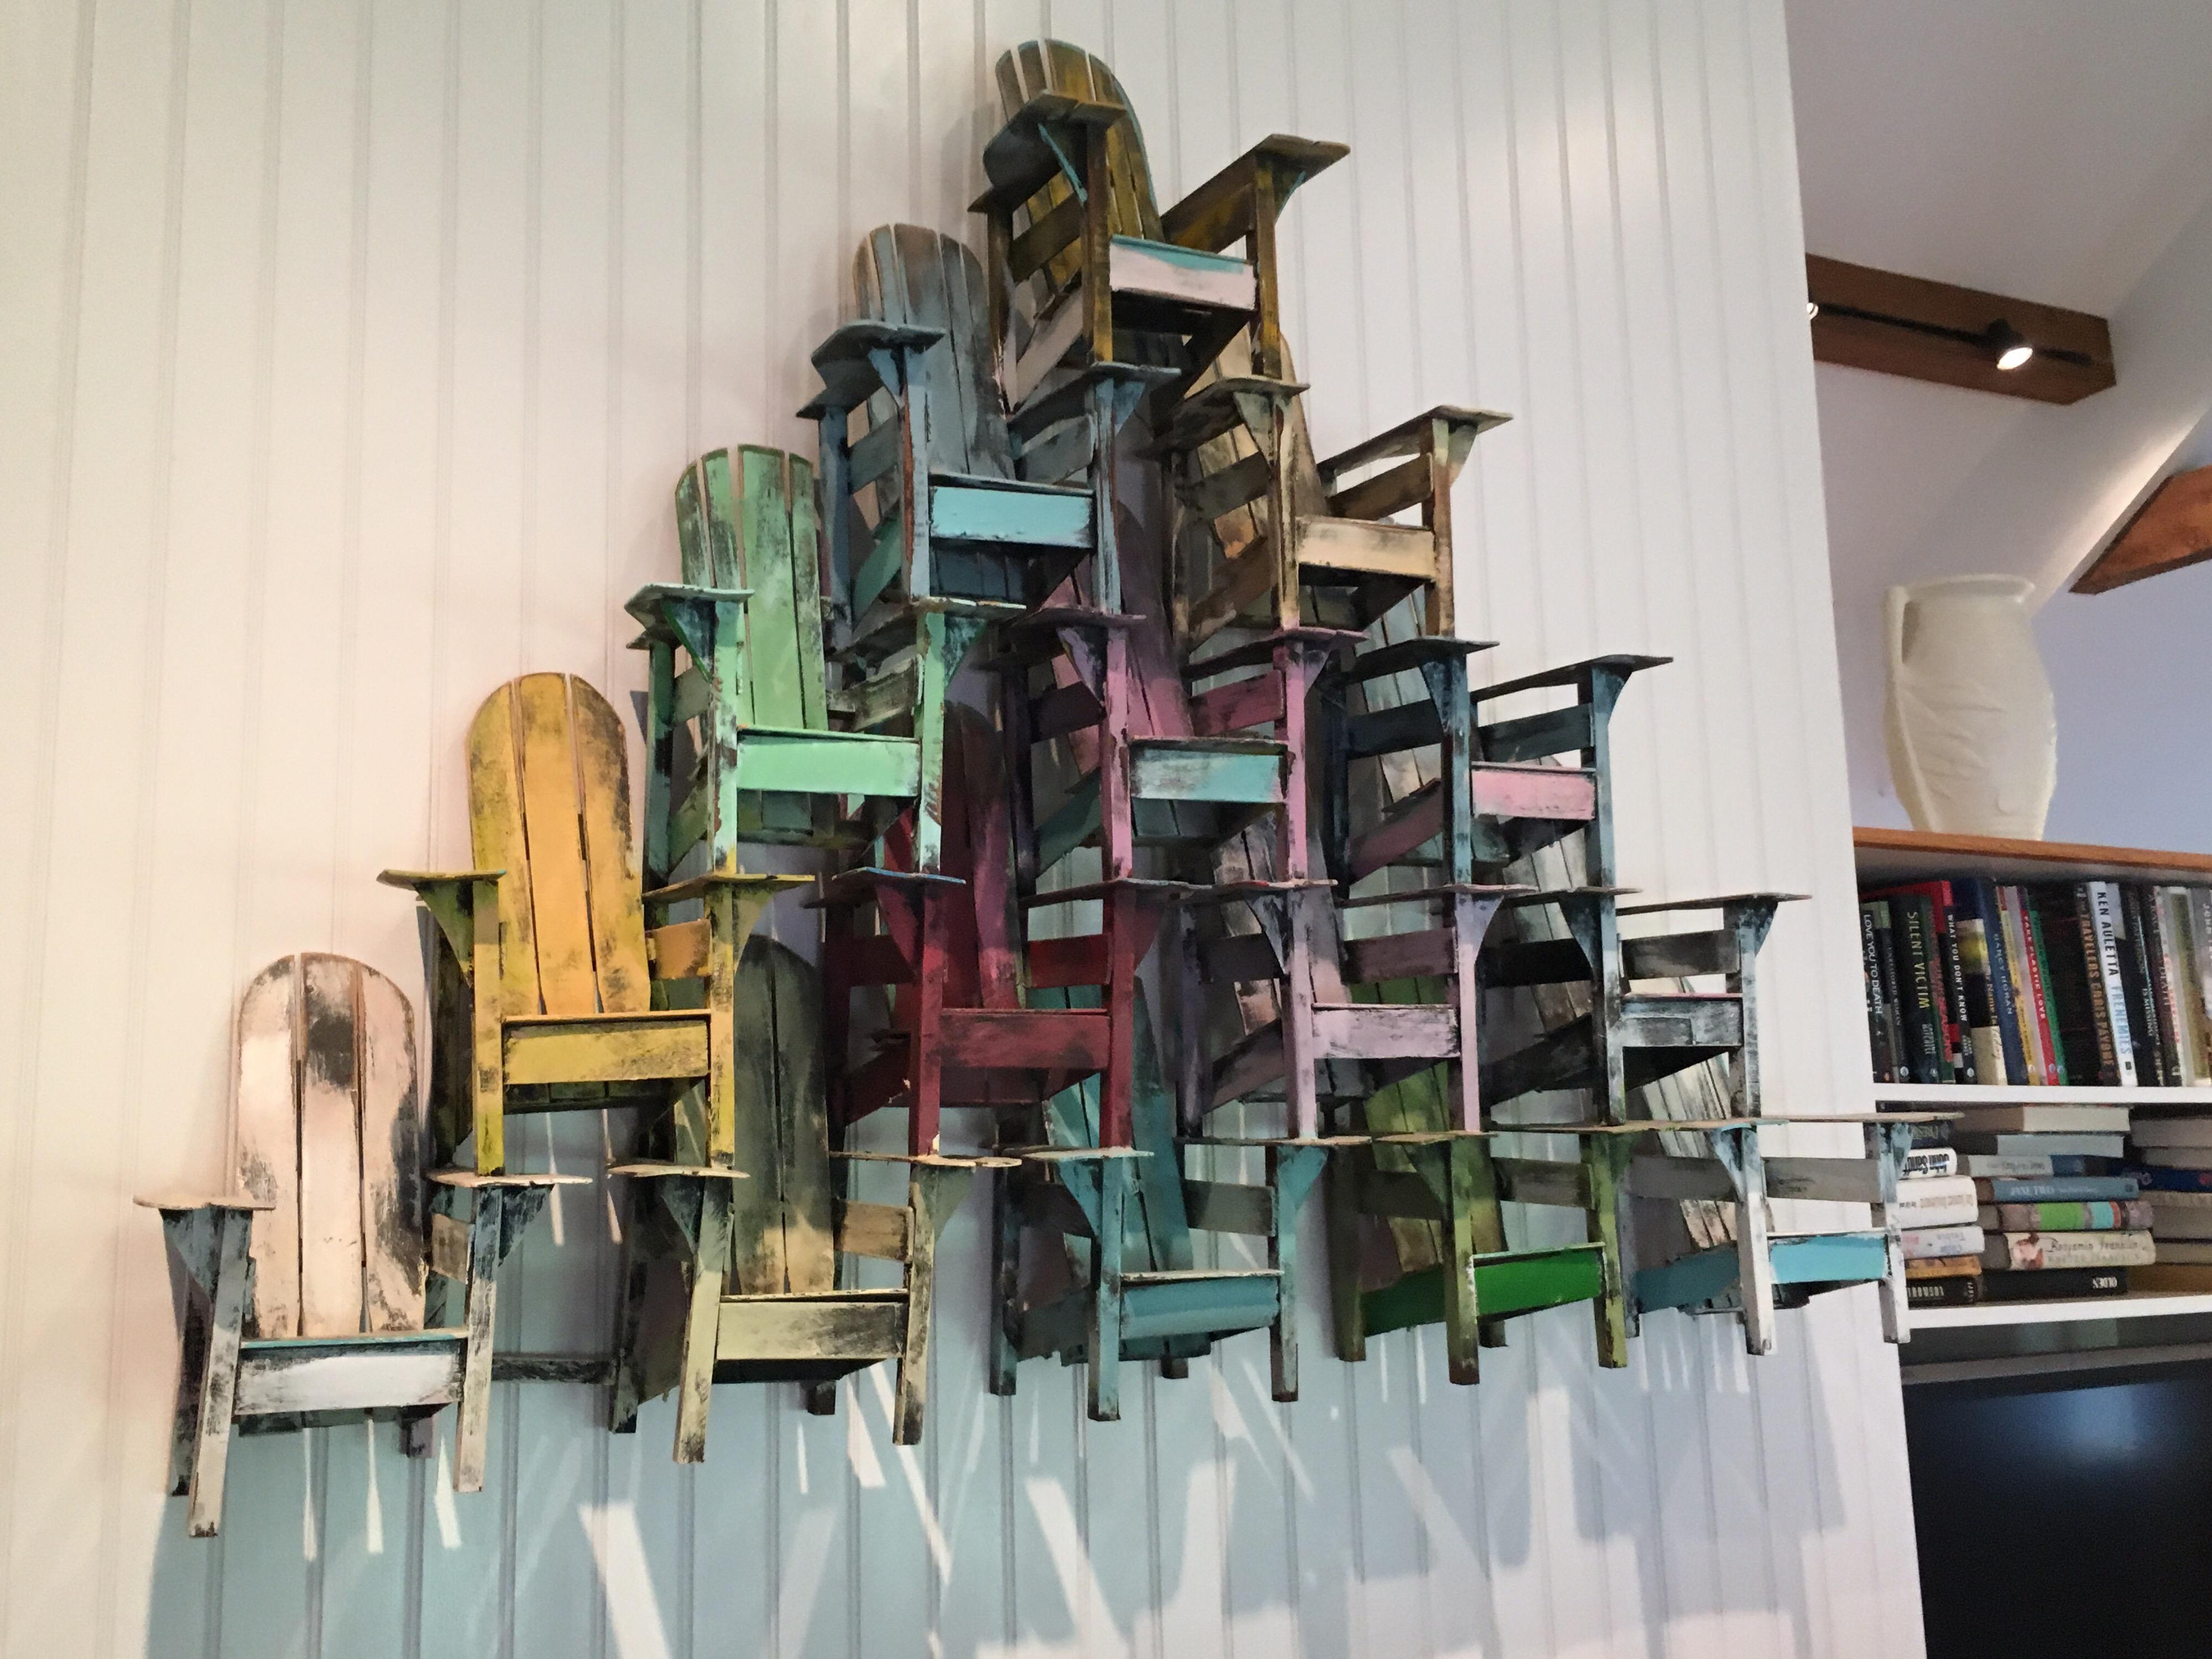 Paul Jacobsen, American, (1943-2018)
Fifteen Adirondack chairs stacked, neatly, in a pyramid formation and painted in bright colors. All made by hand by Jacobsen. Signed, 9/92,
Acrylic on wood, unique pyramid shape. 

Among his most famous works are